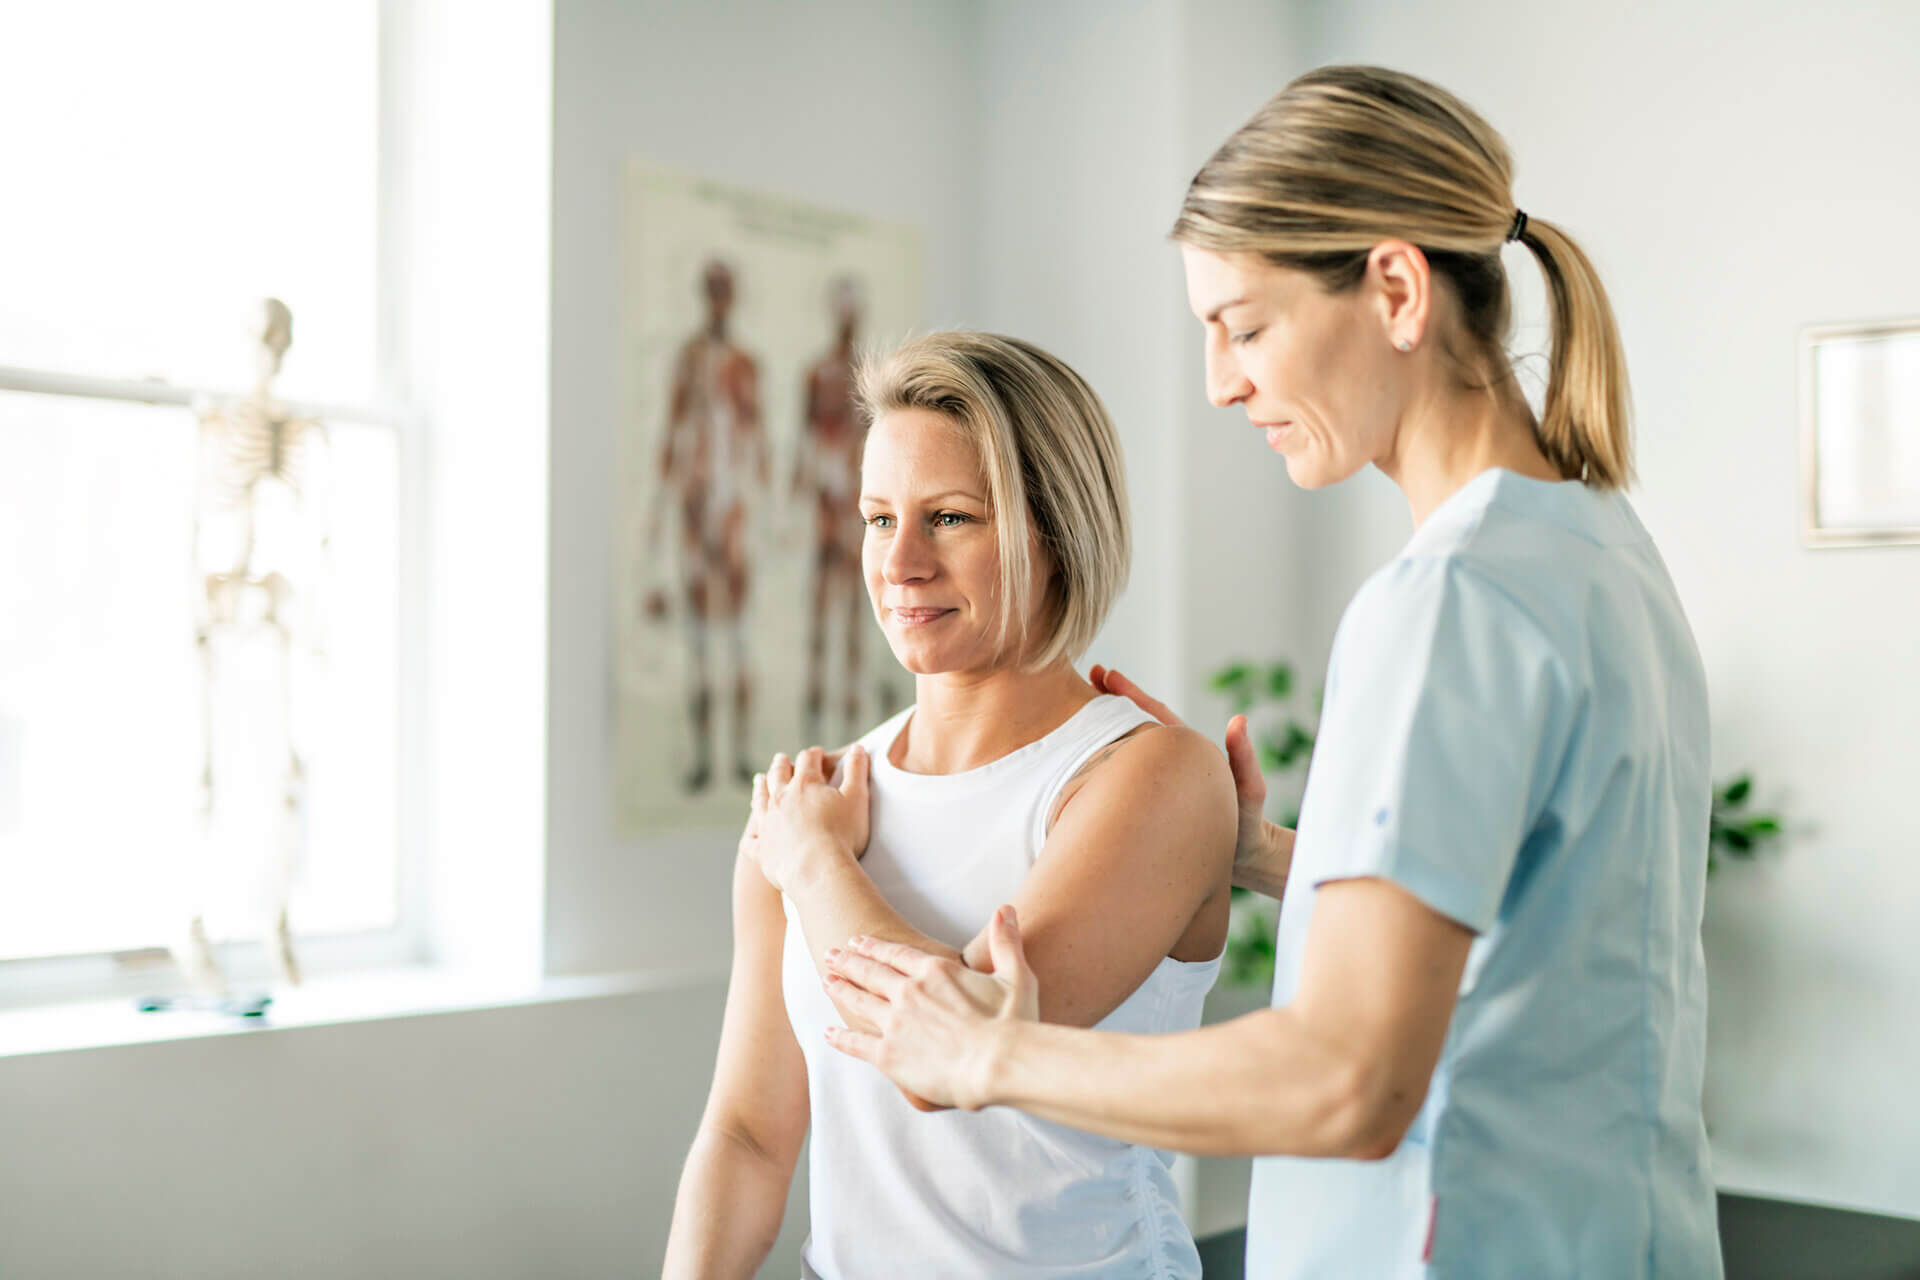 Physio helping patient test shoulder mobility